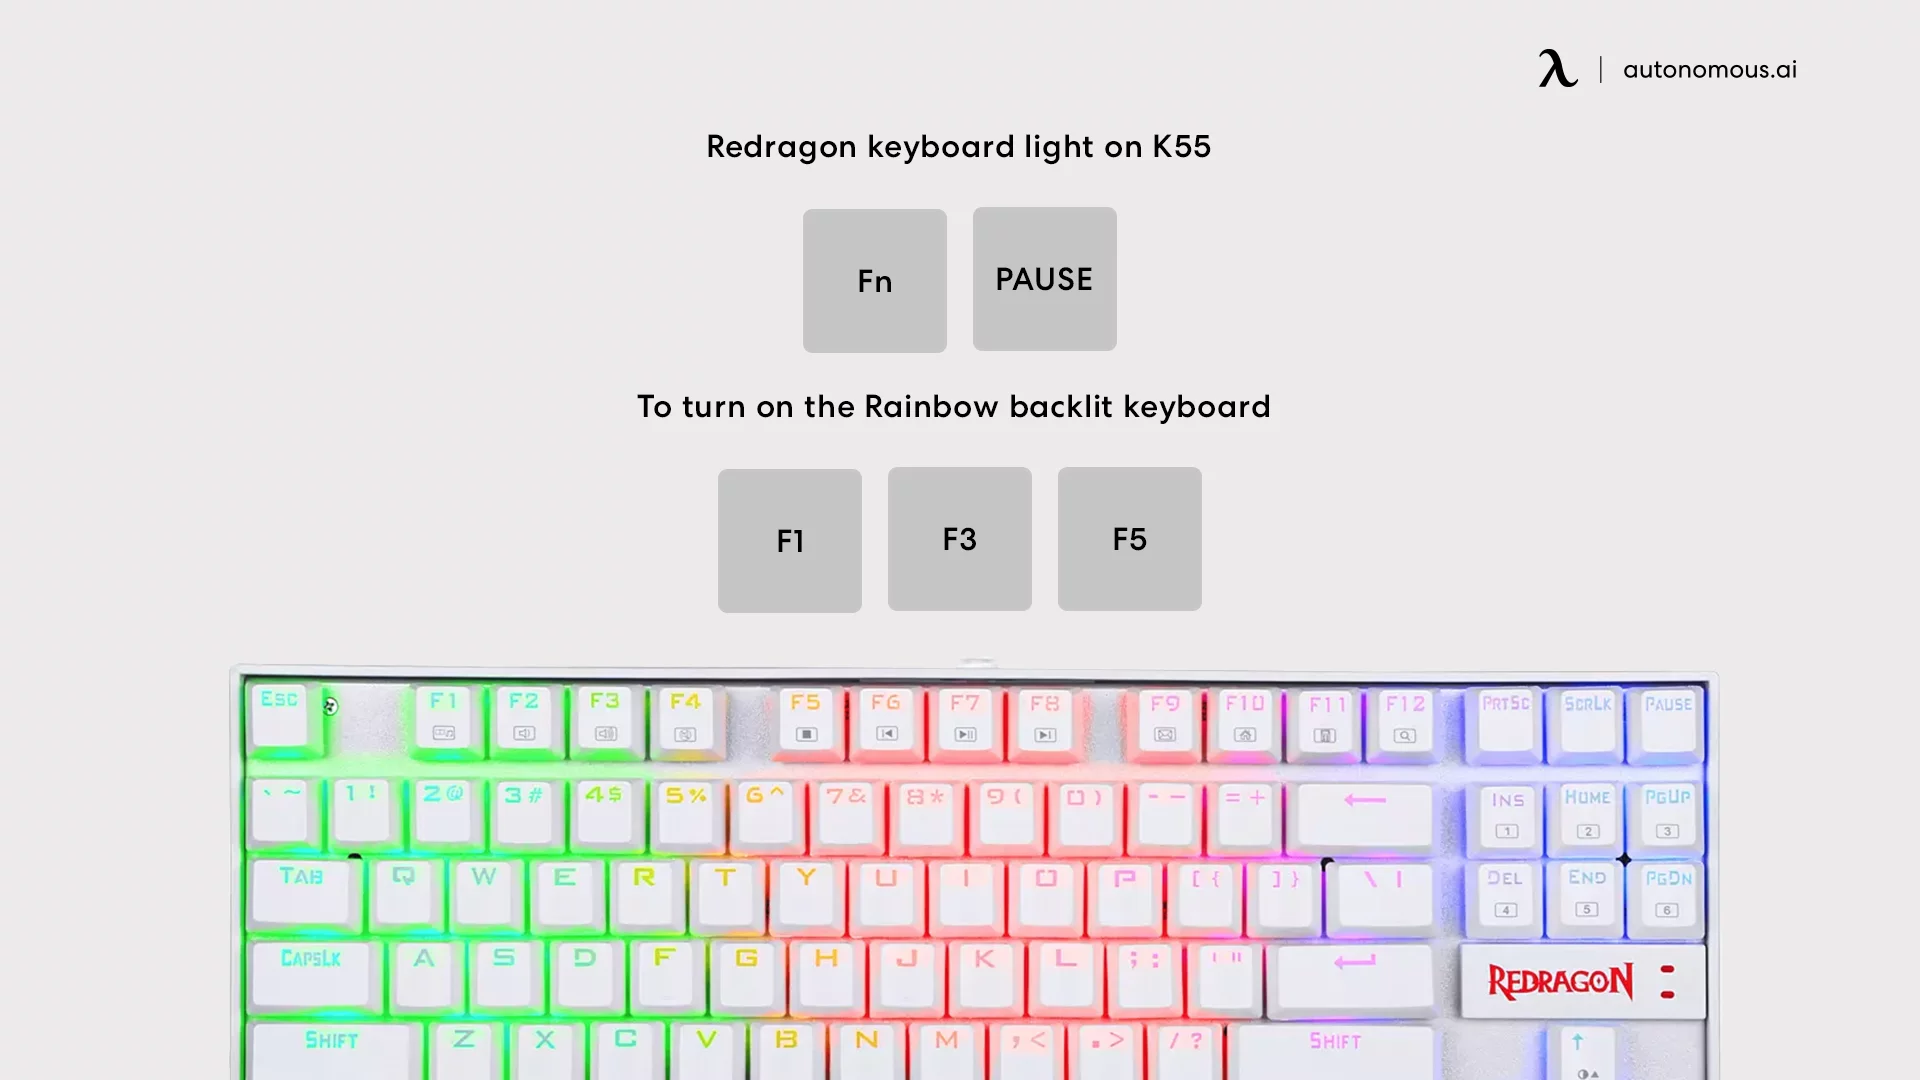 How to make the Redragon keyboard light up